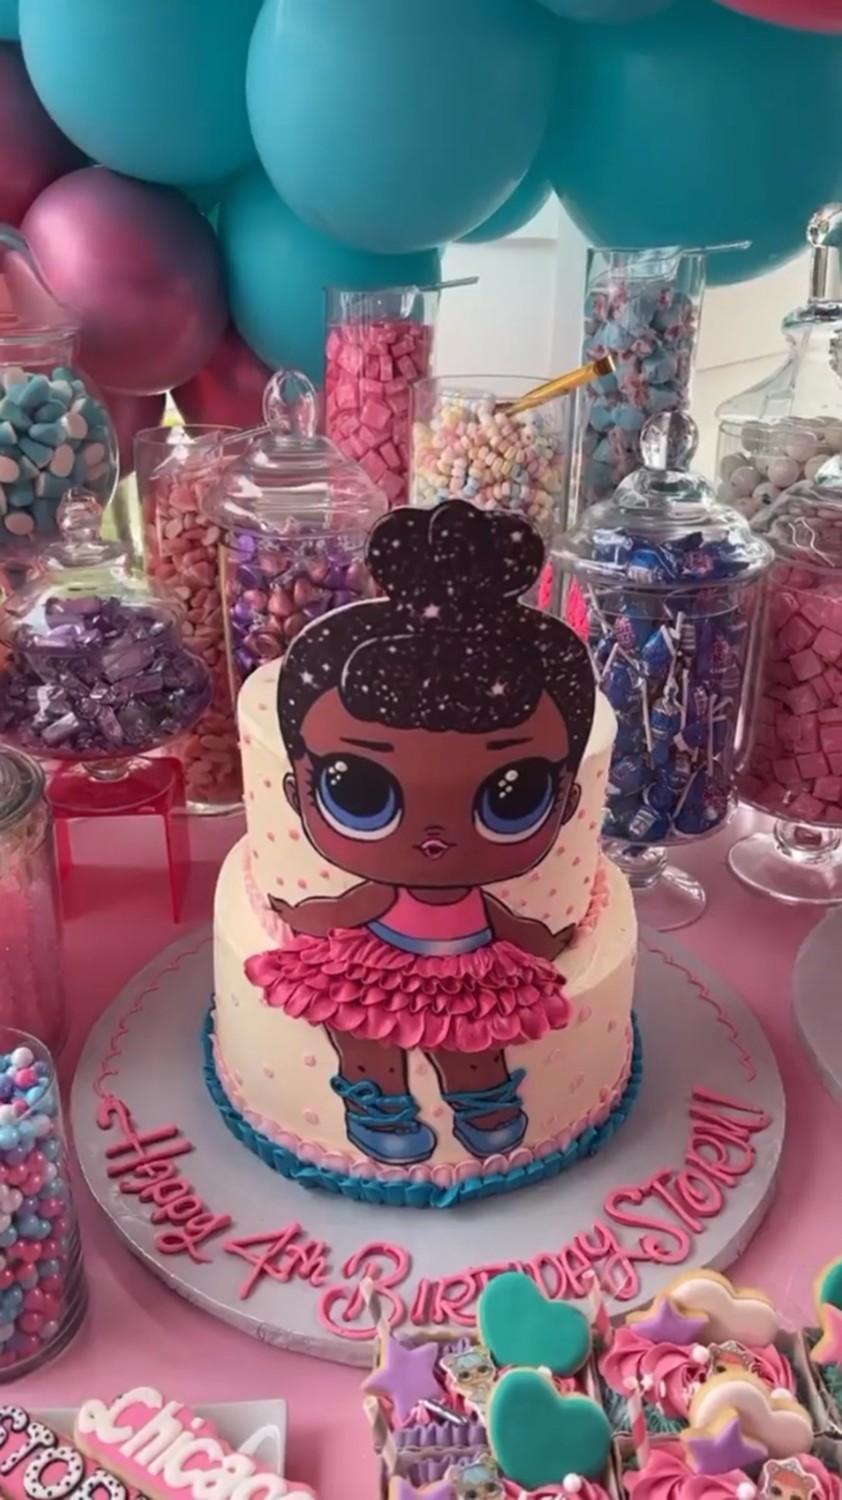 Treats from Stormi and Chicago’s joint birthday party. Instagram